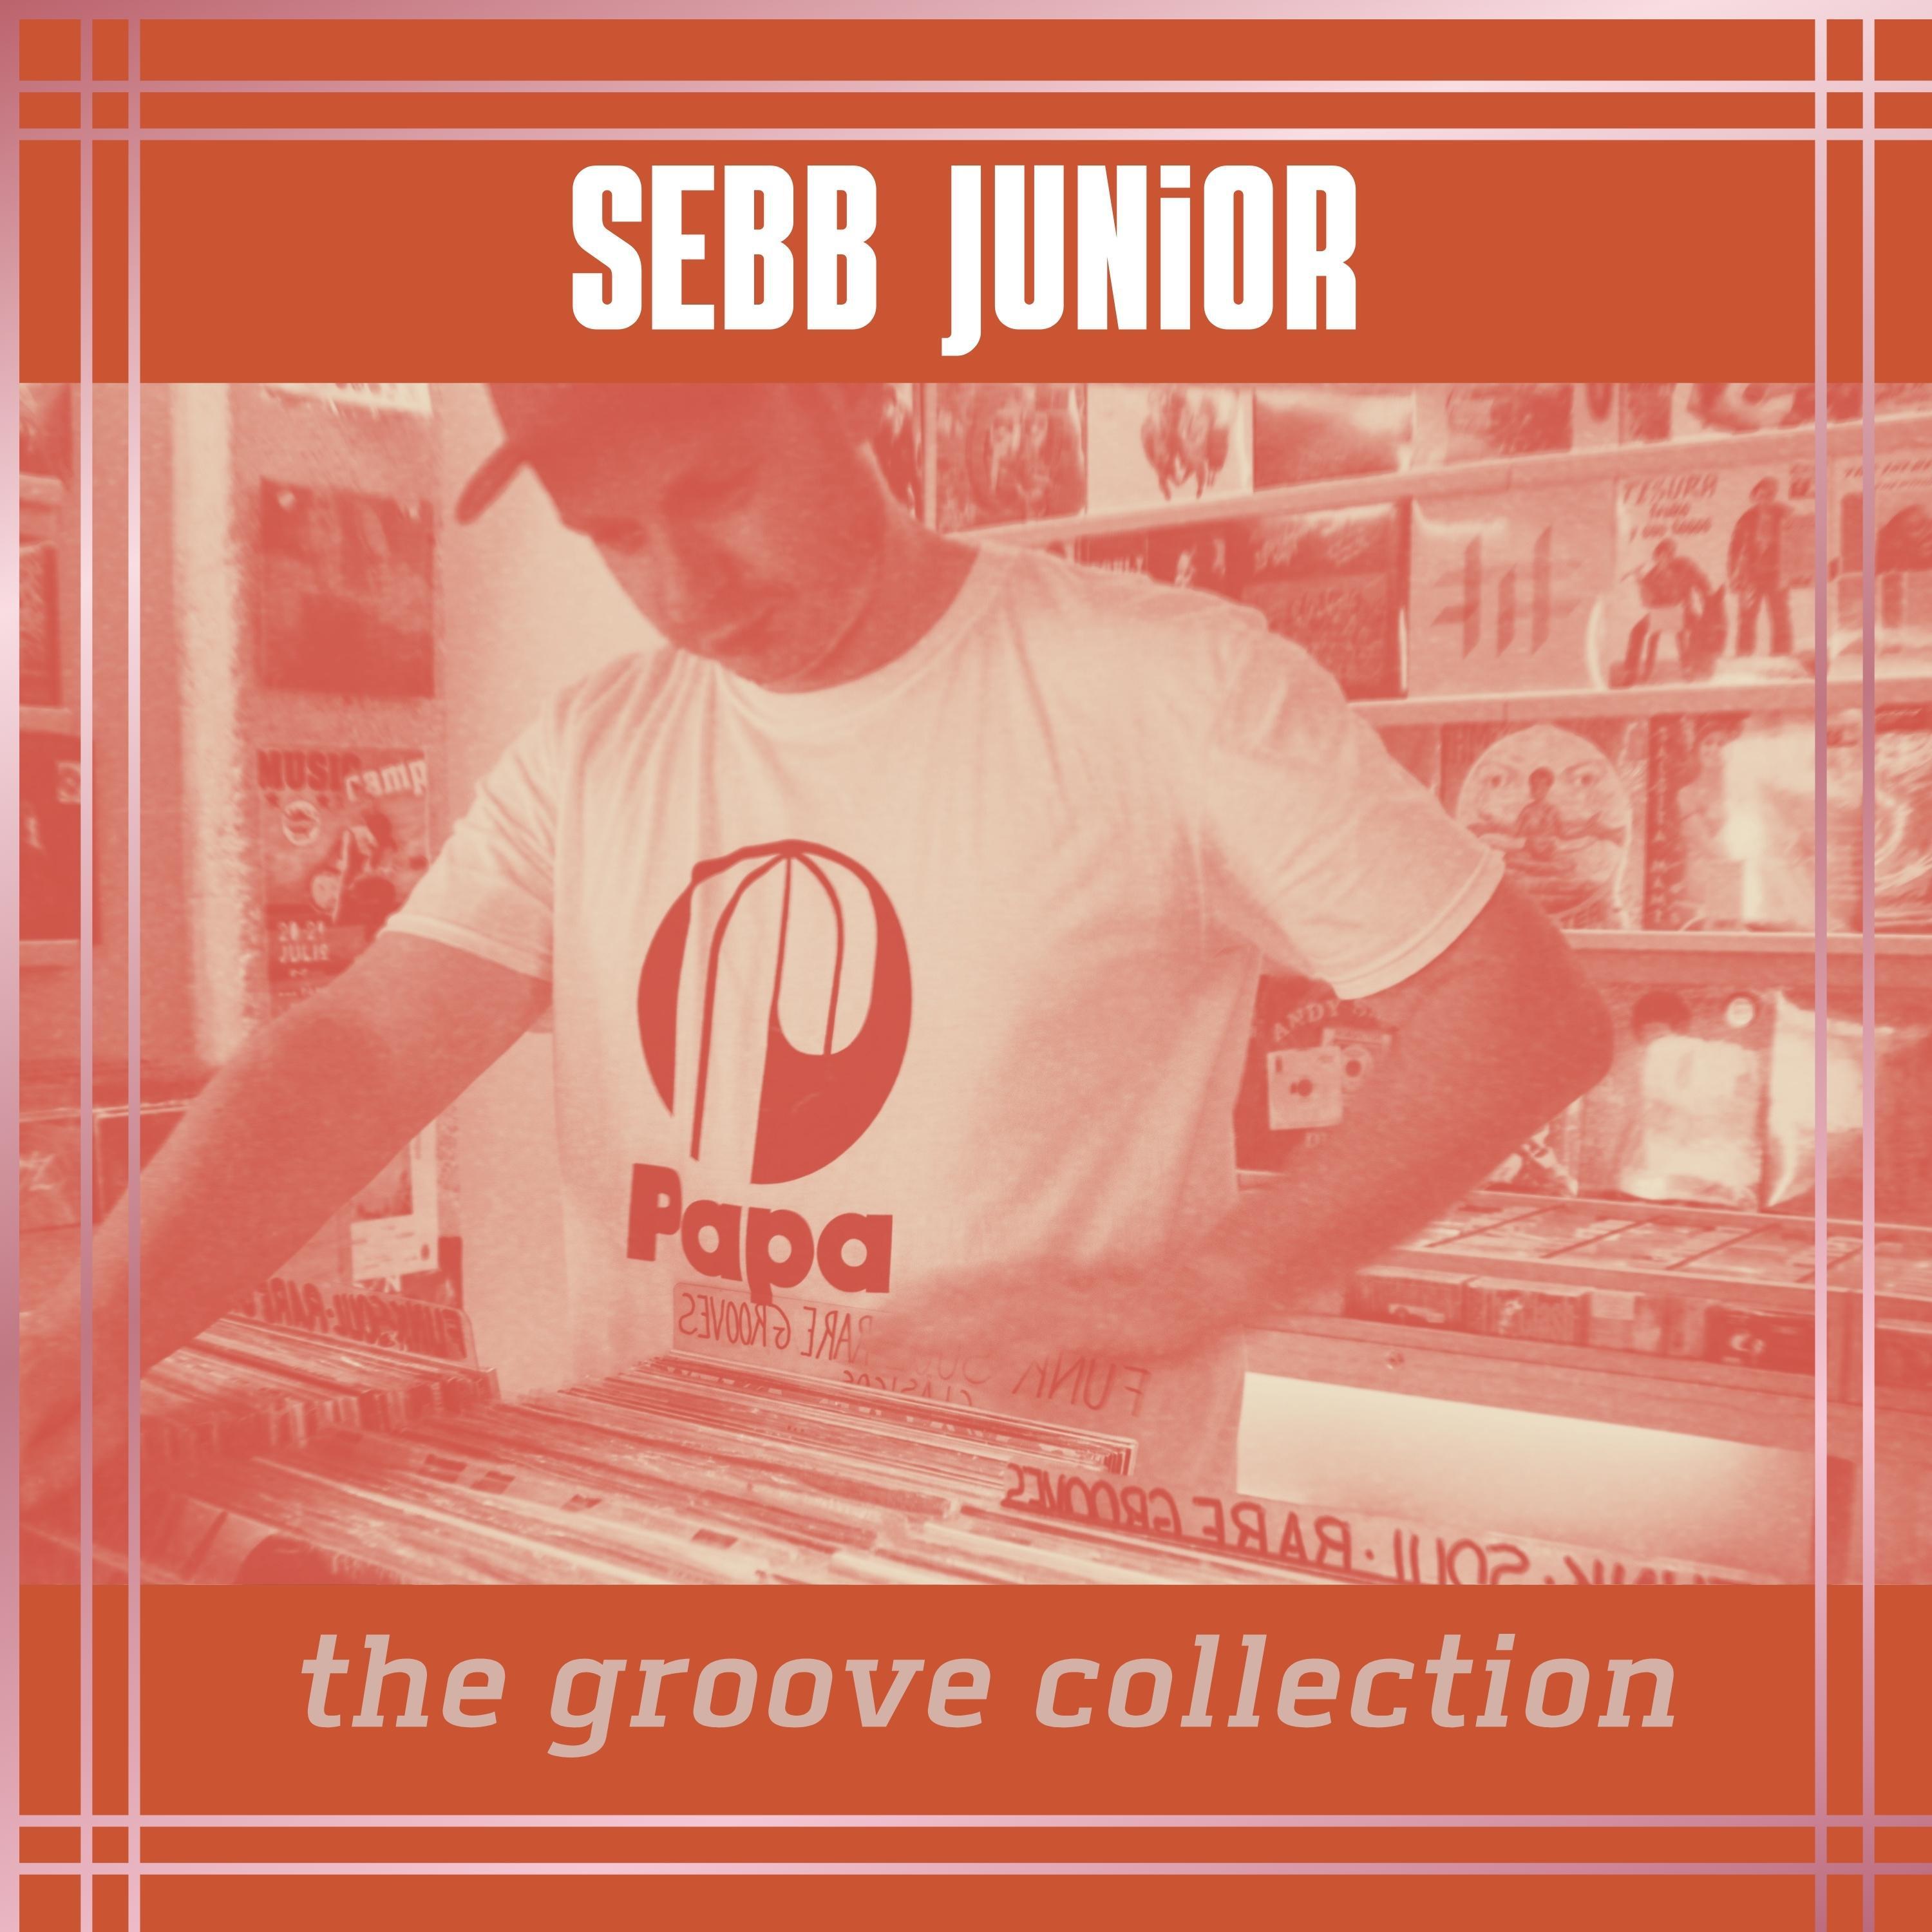 Reel People - I Want To Thank You (Sebb Junior Remix)